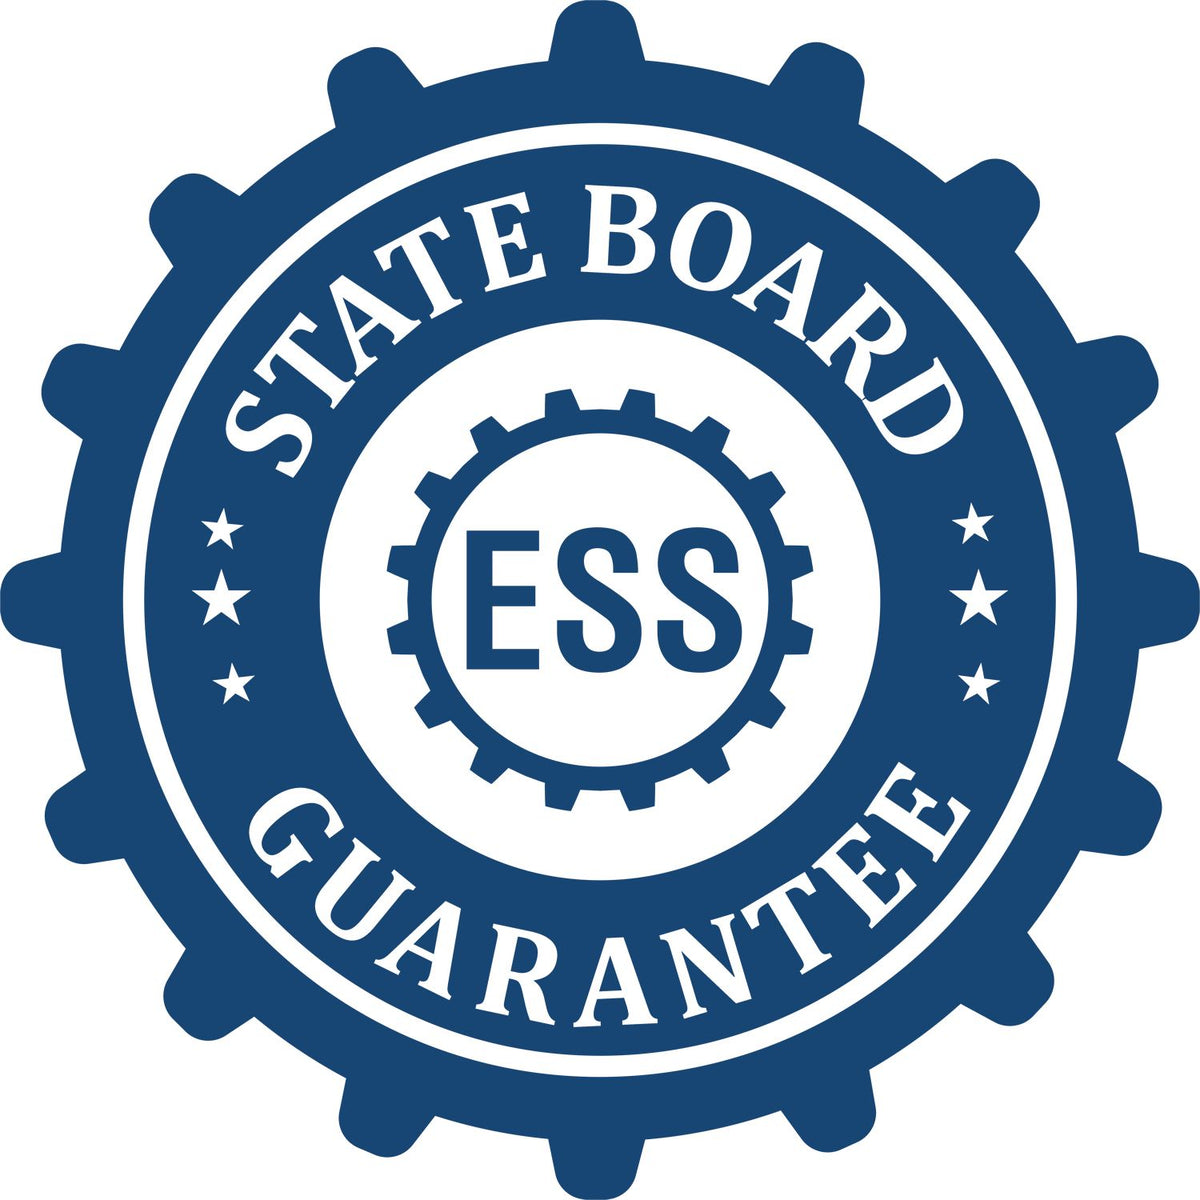 An emblem in a gear shape illustrating a state board guarantee for the Digital Maryland PE Stamp and Electronic Seal for Maryland Engineer product.